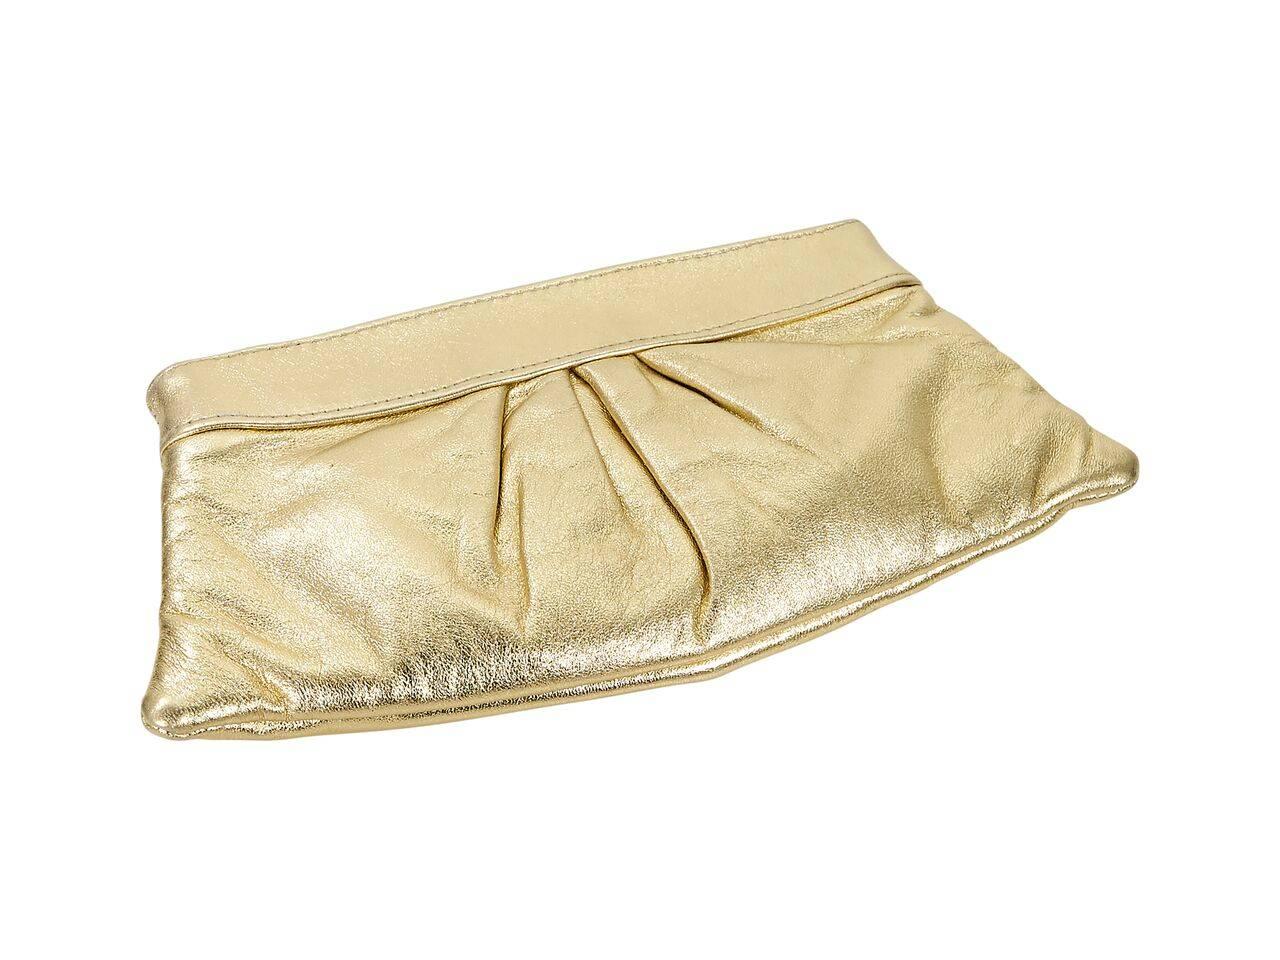 Product details:  Metallic gold clutch by Lauren Merkin.  Accented with front and back pleats.  Hinged top closure.  Lined interior.  
Condition: Pre-owned. Very good.
Est. Retail $ 225.00